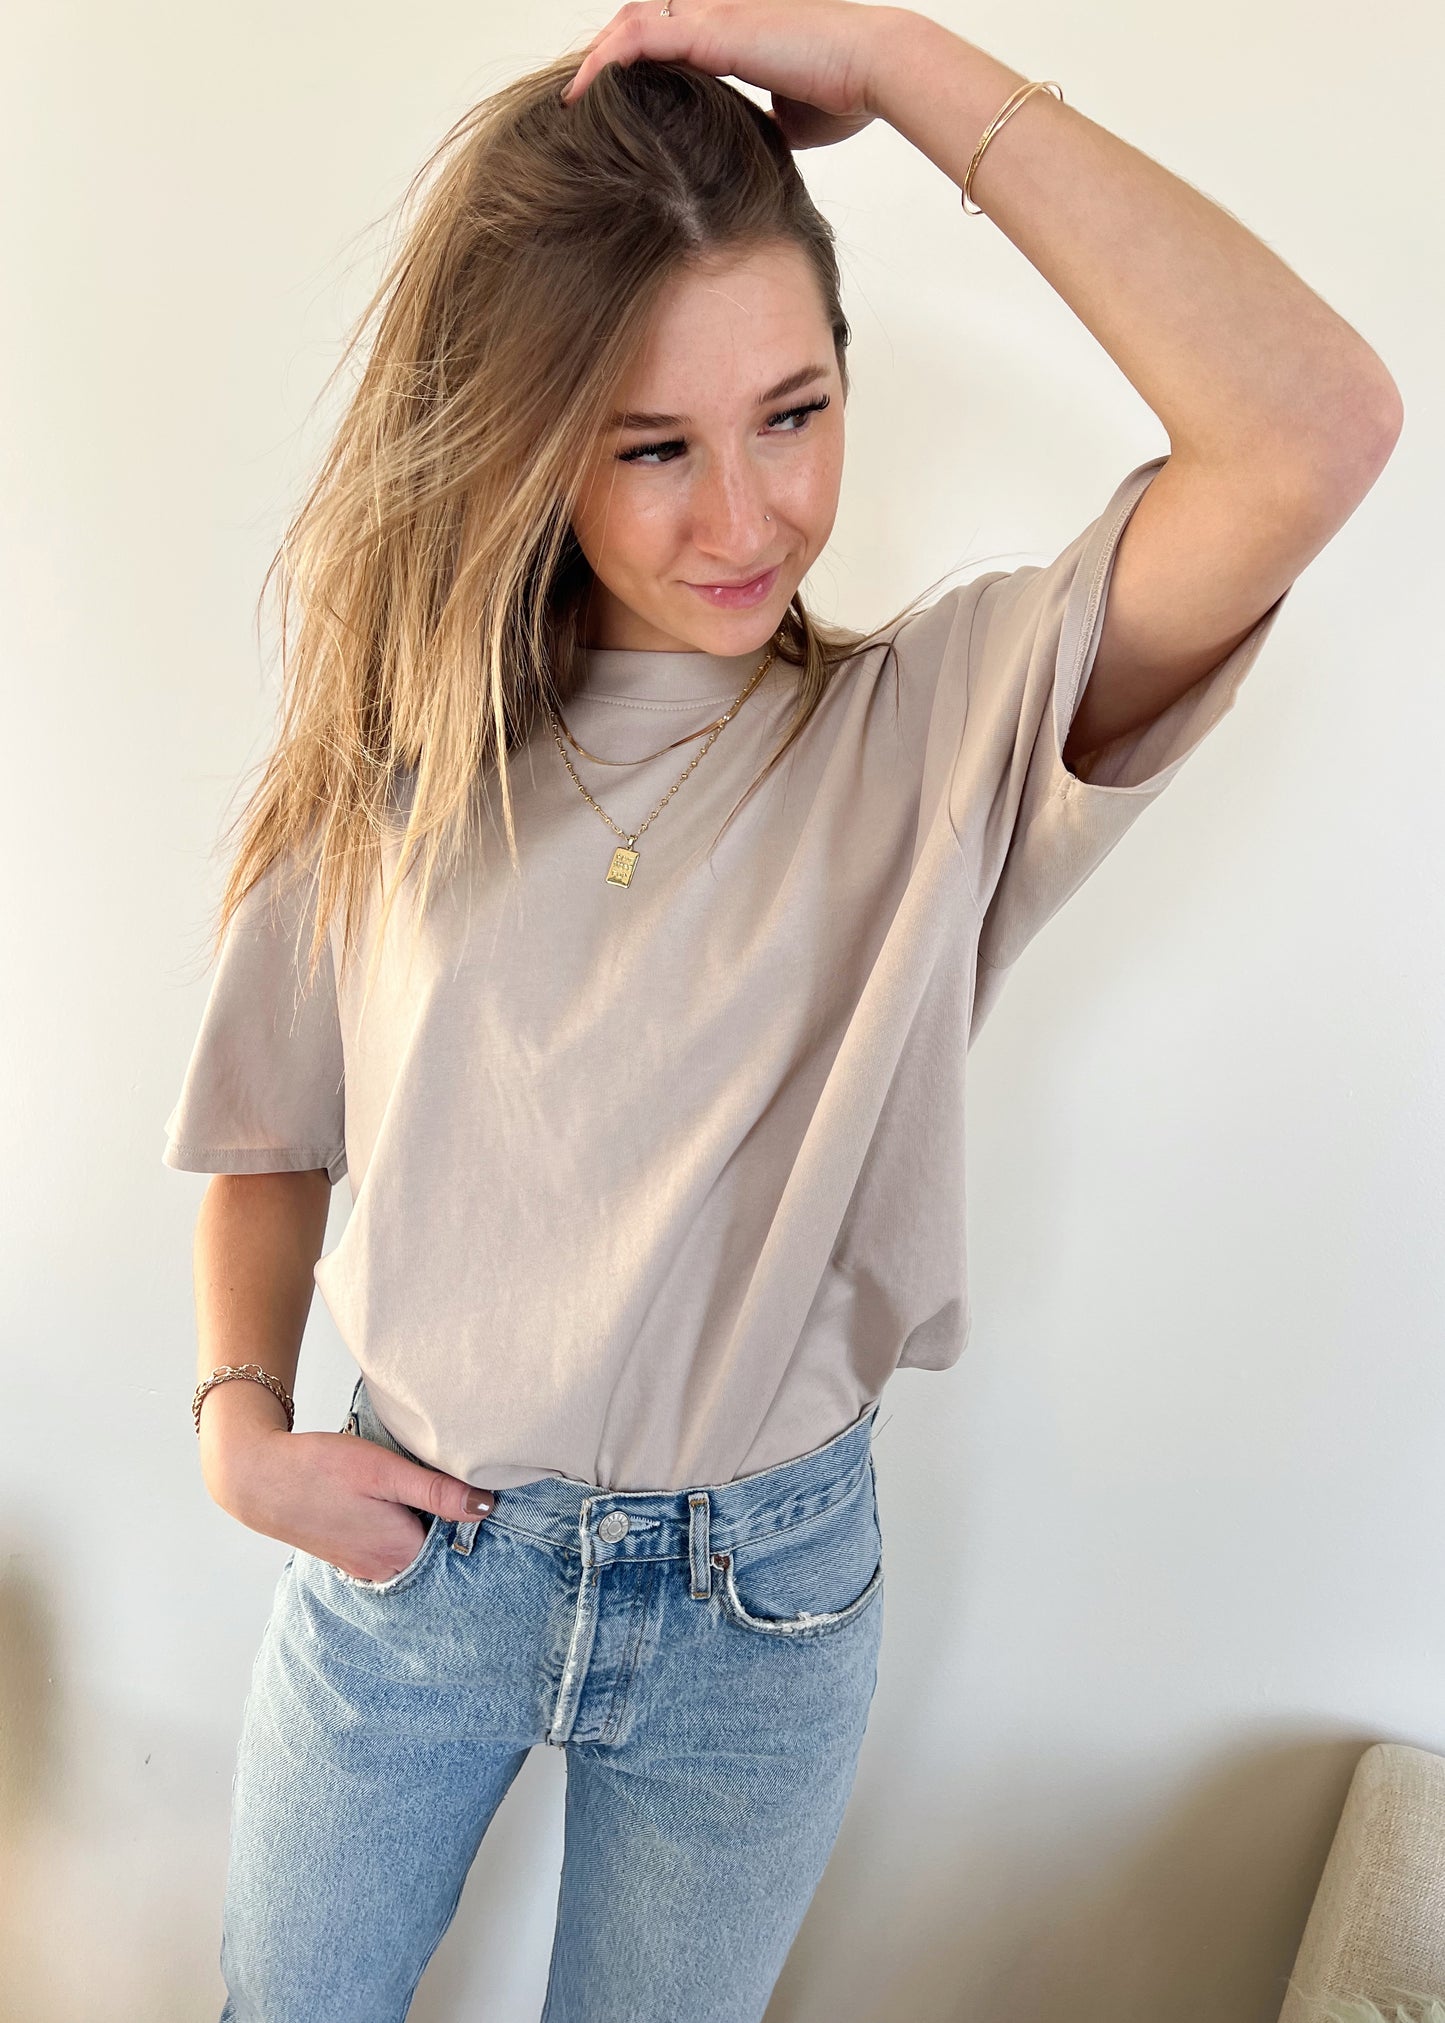 Brunette the Label Boxy Tee